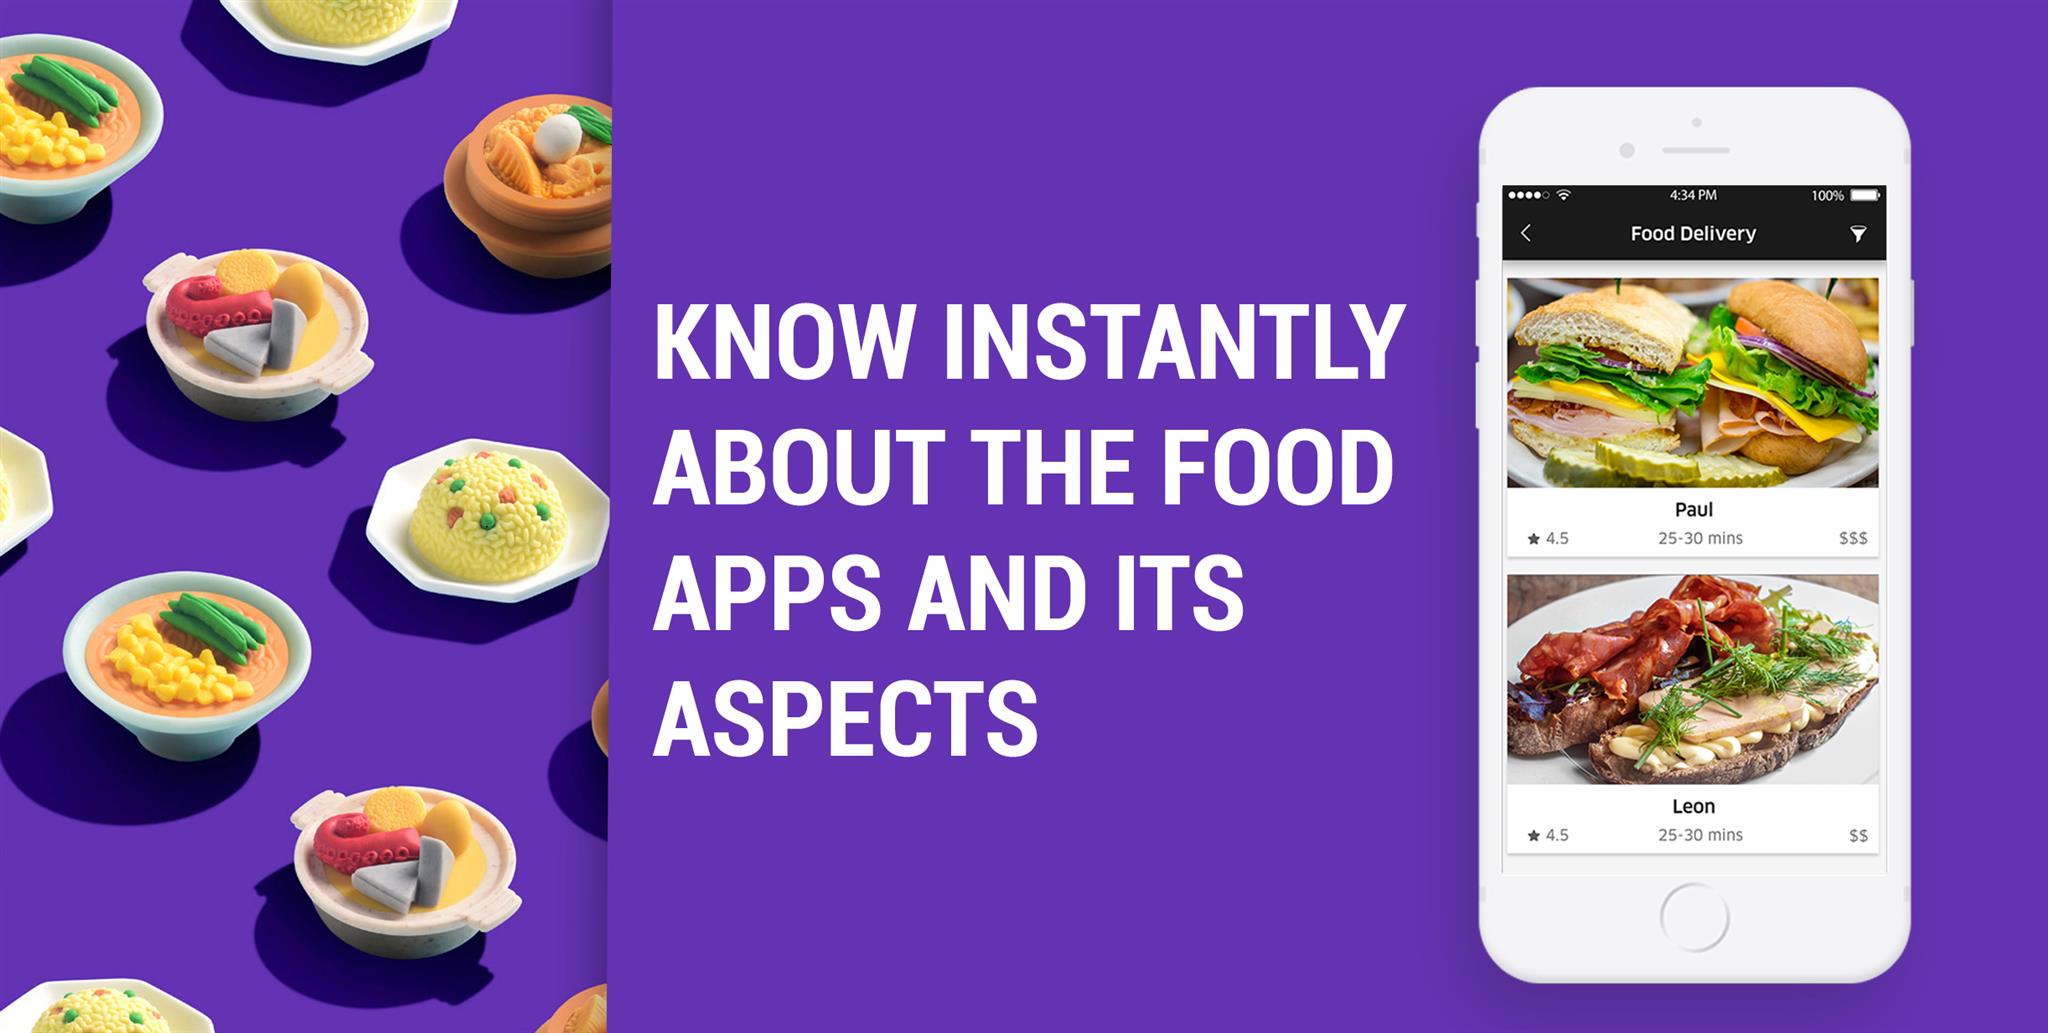 Have A Quick Look At All The Aspects Of Food Apps